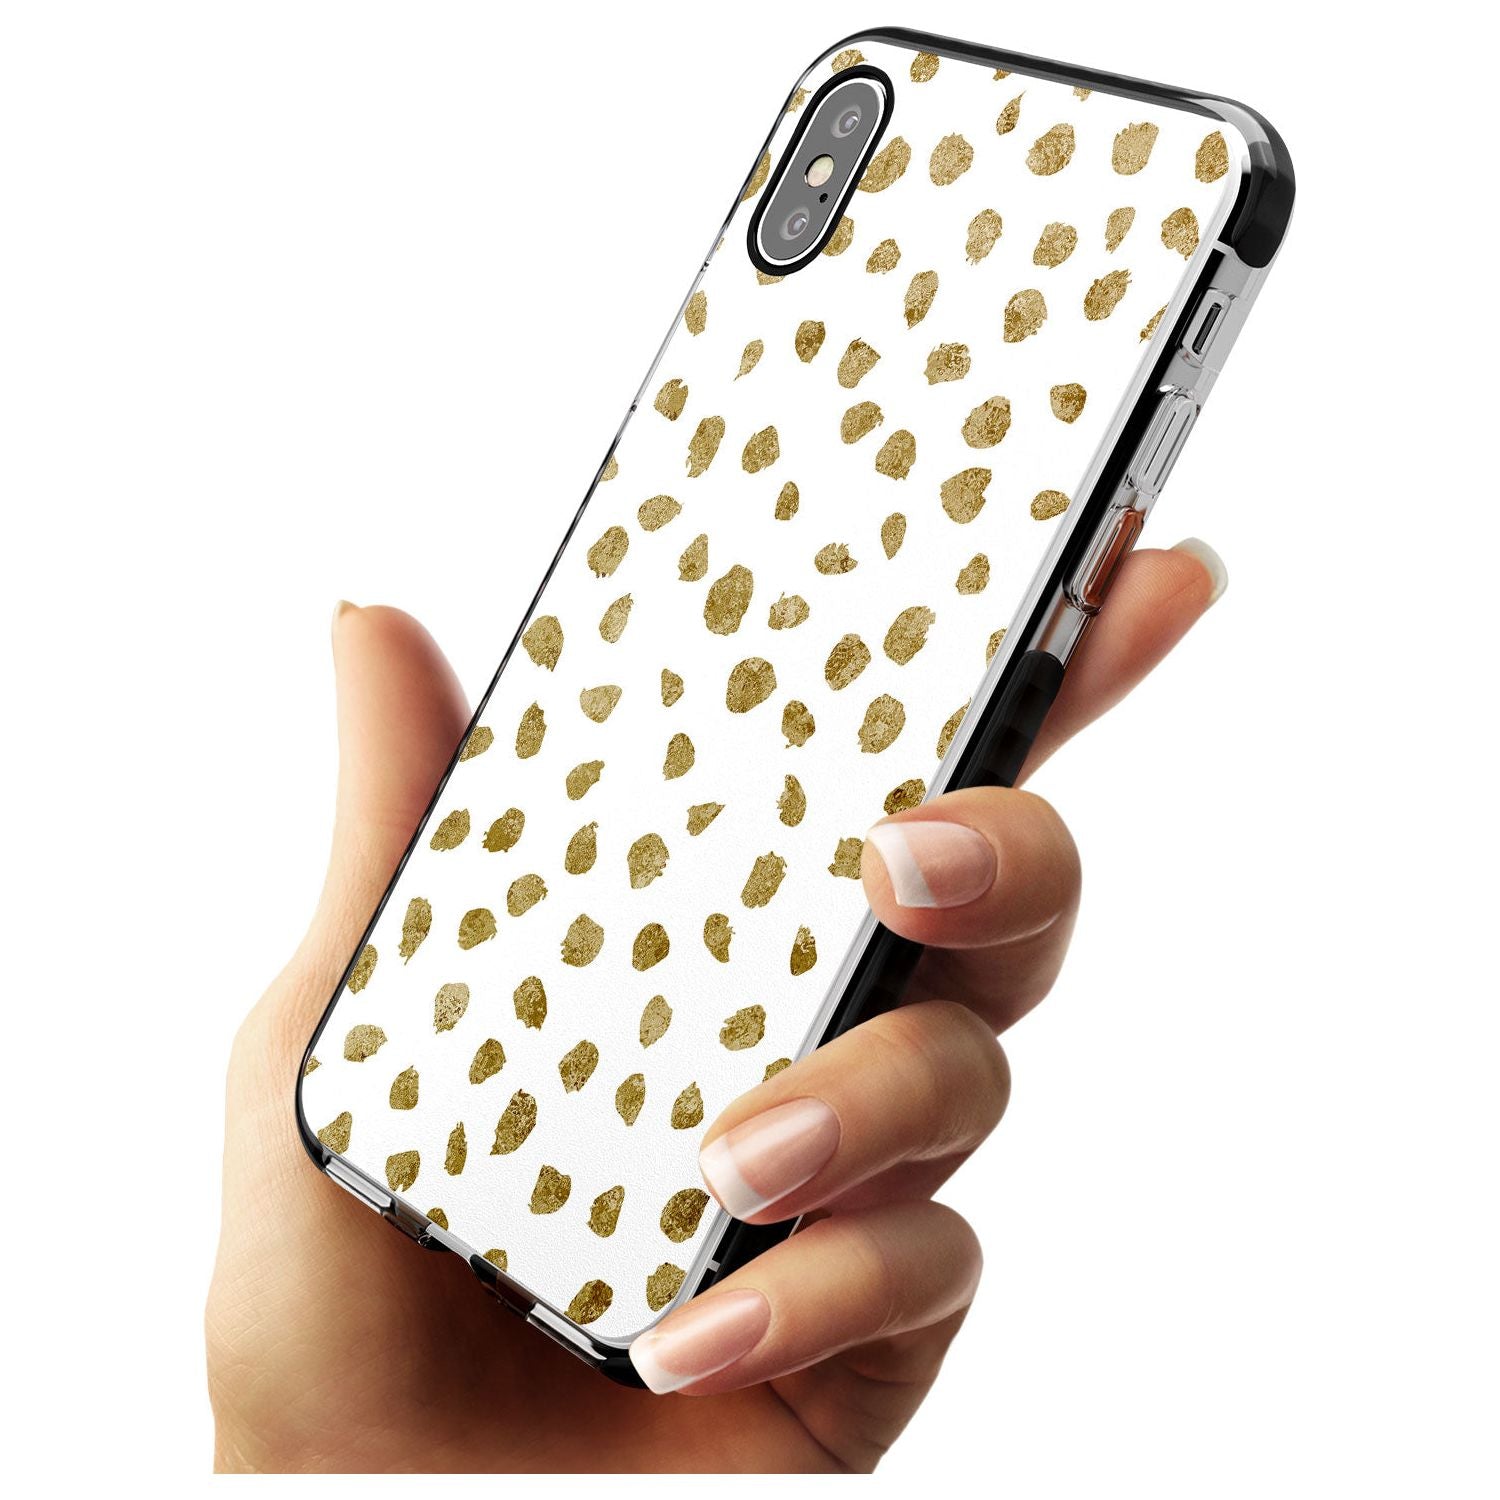 Gold Look on White Dalmatian Polka Dot Spots Black Impact Phone Case for iPhone X XS Max XR